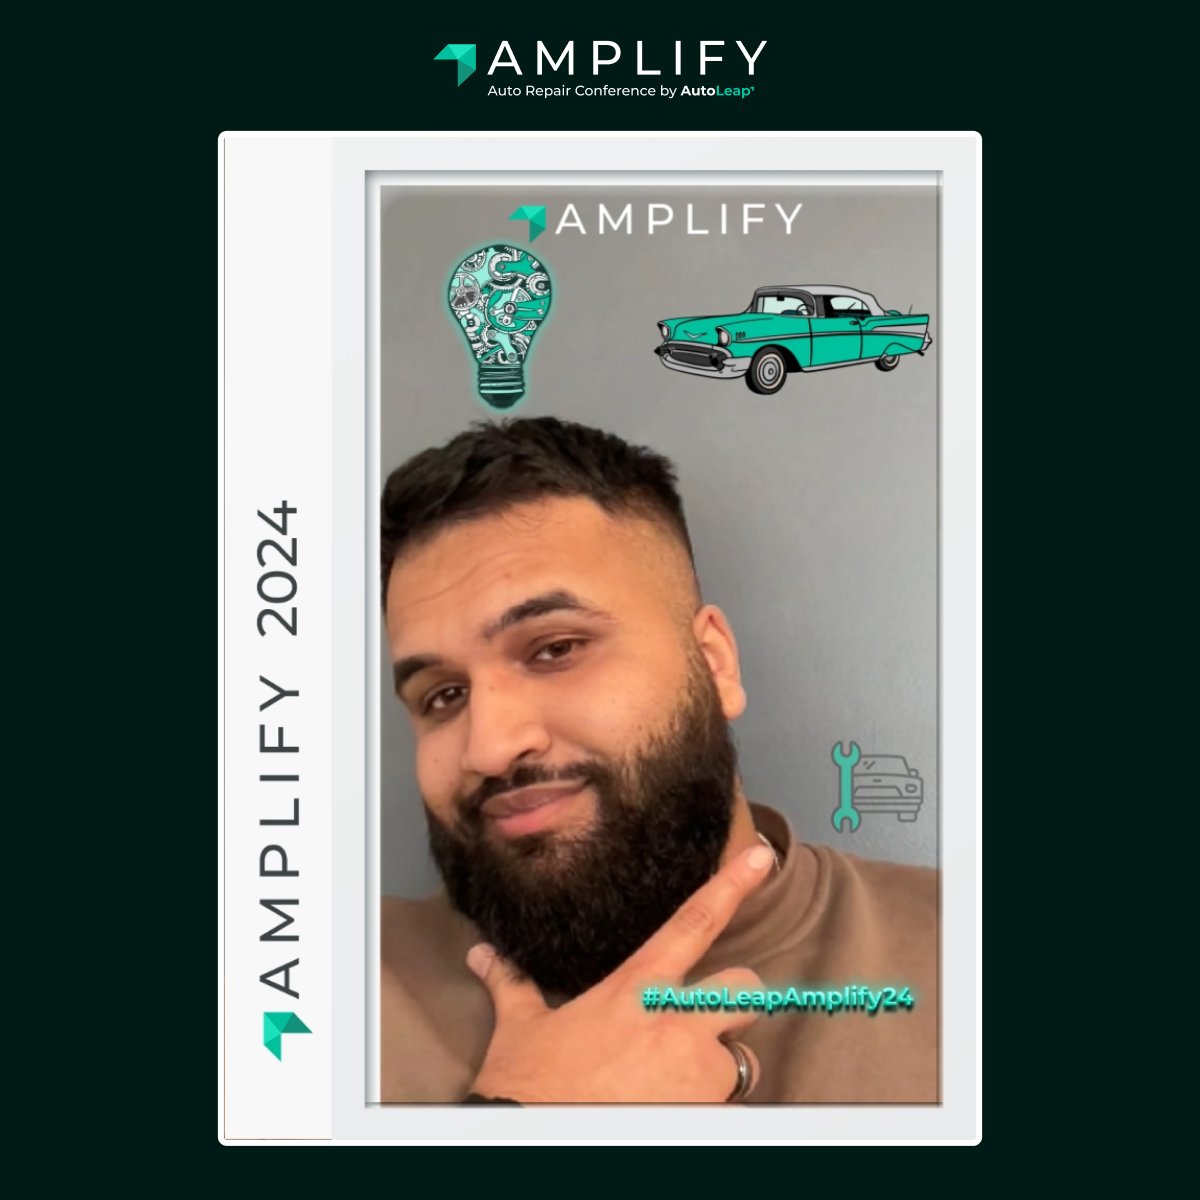 Capturing the vibrant energy of Amplify 2024! Thank you to everyone who added their unique spark to our memories. 📸✨ Don't miss out on the inspiring sessions - catch them on-demand now! tinyurl.com/2w49j97m #autoleapamplify24 #autoleap #autorepair #conference